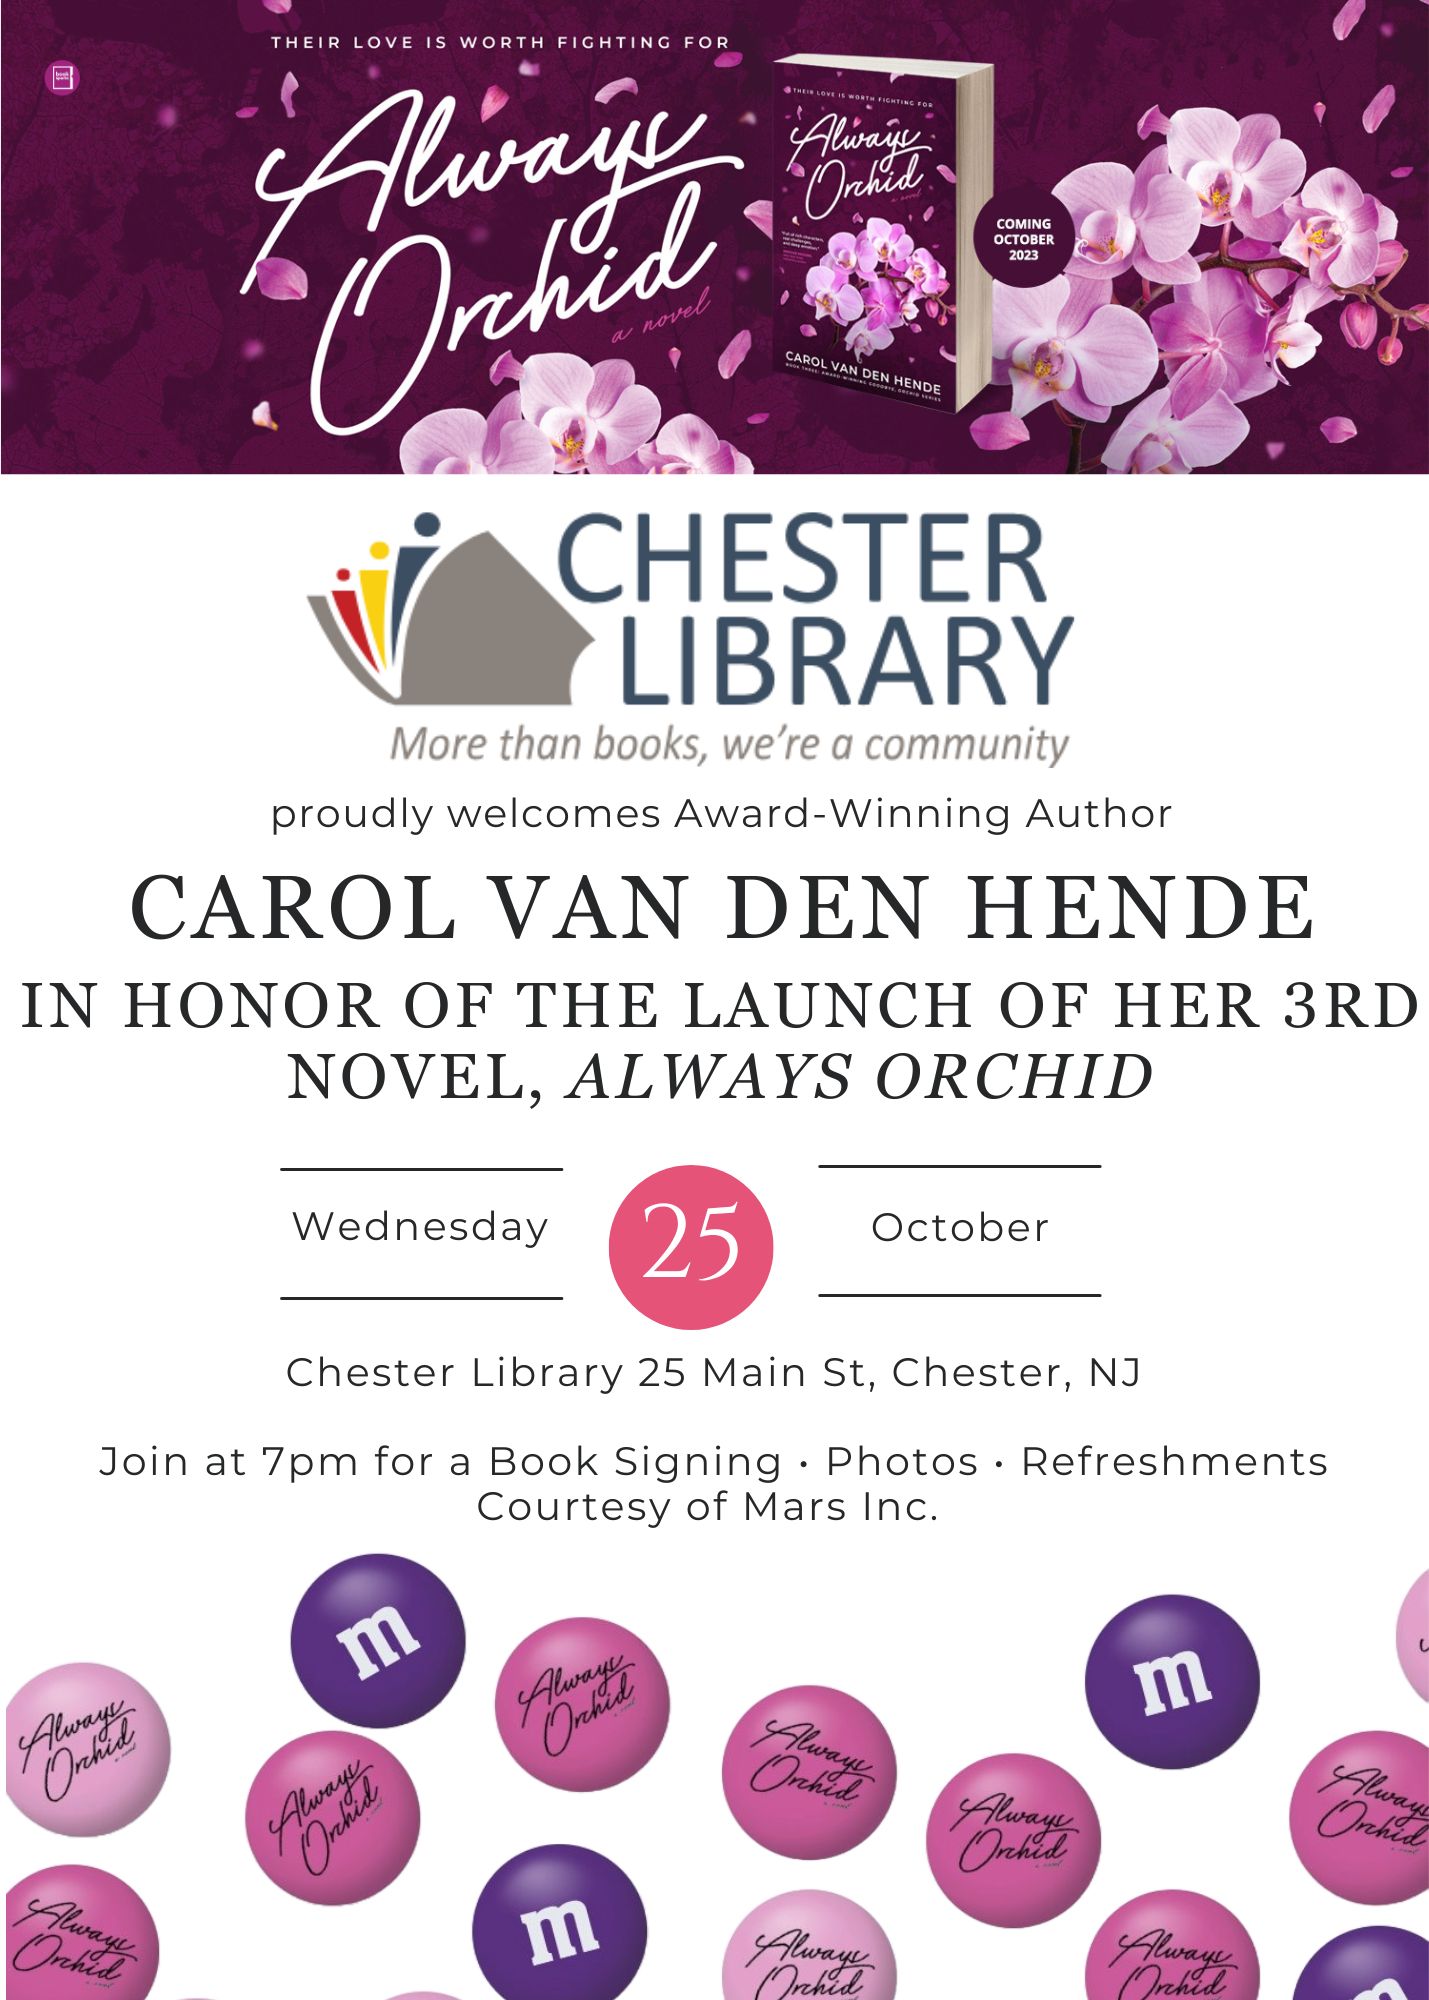 Chester Library proudly welcomes award-winning author Carol Van Den Hende in honor of the launch of her 3rd novel, Always Orchid. Wednesday October 25th. Join at 7pm for a book signing, photos, refreshments courtesy of Mars Inc